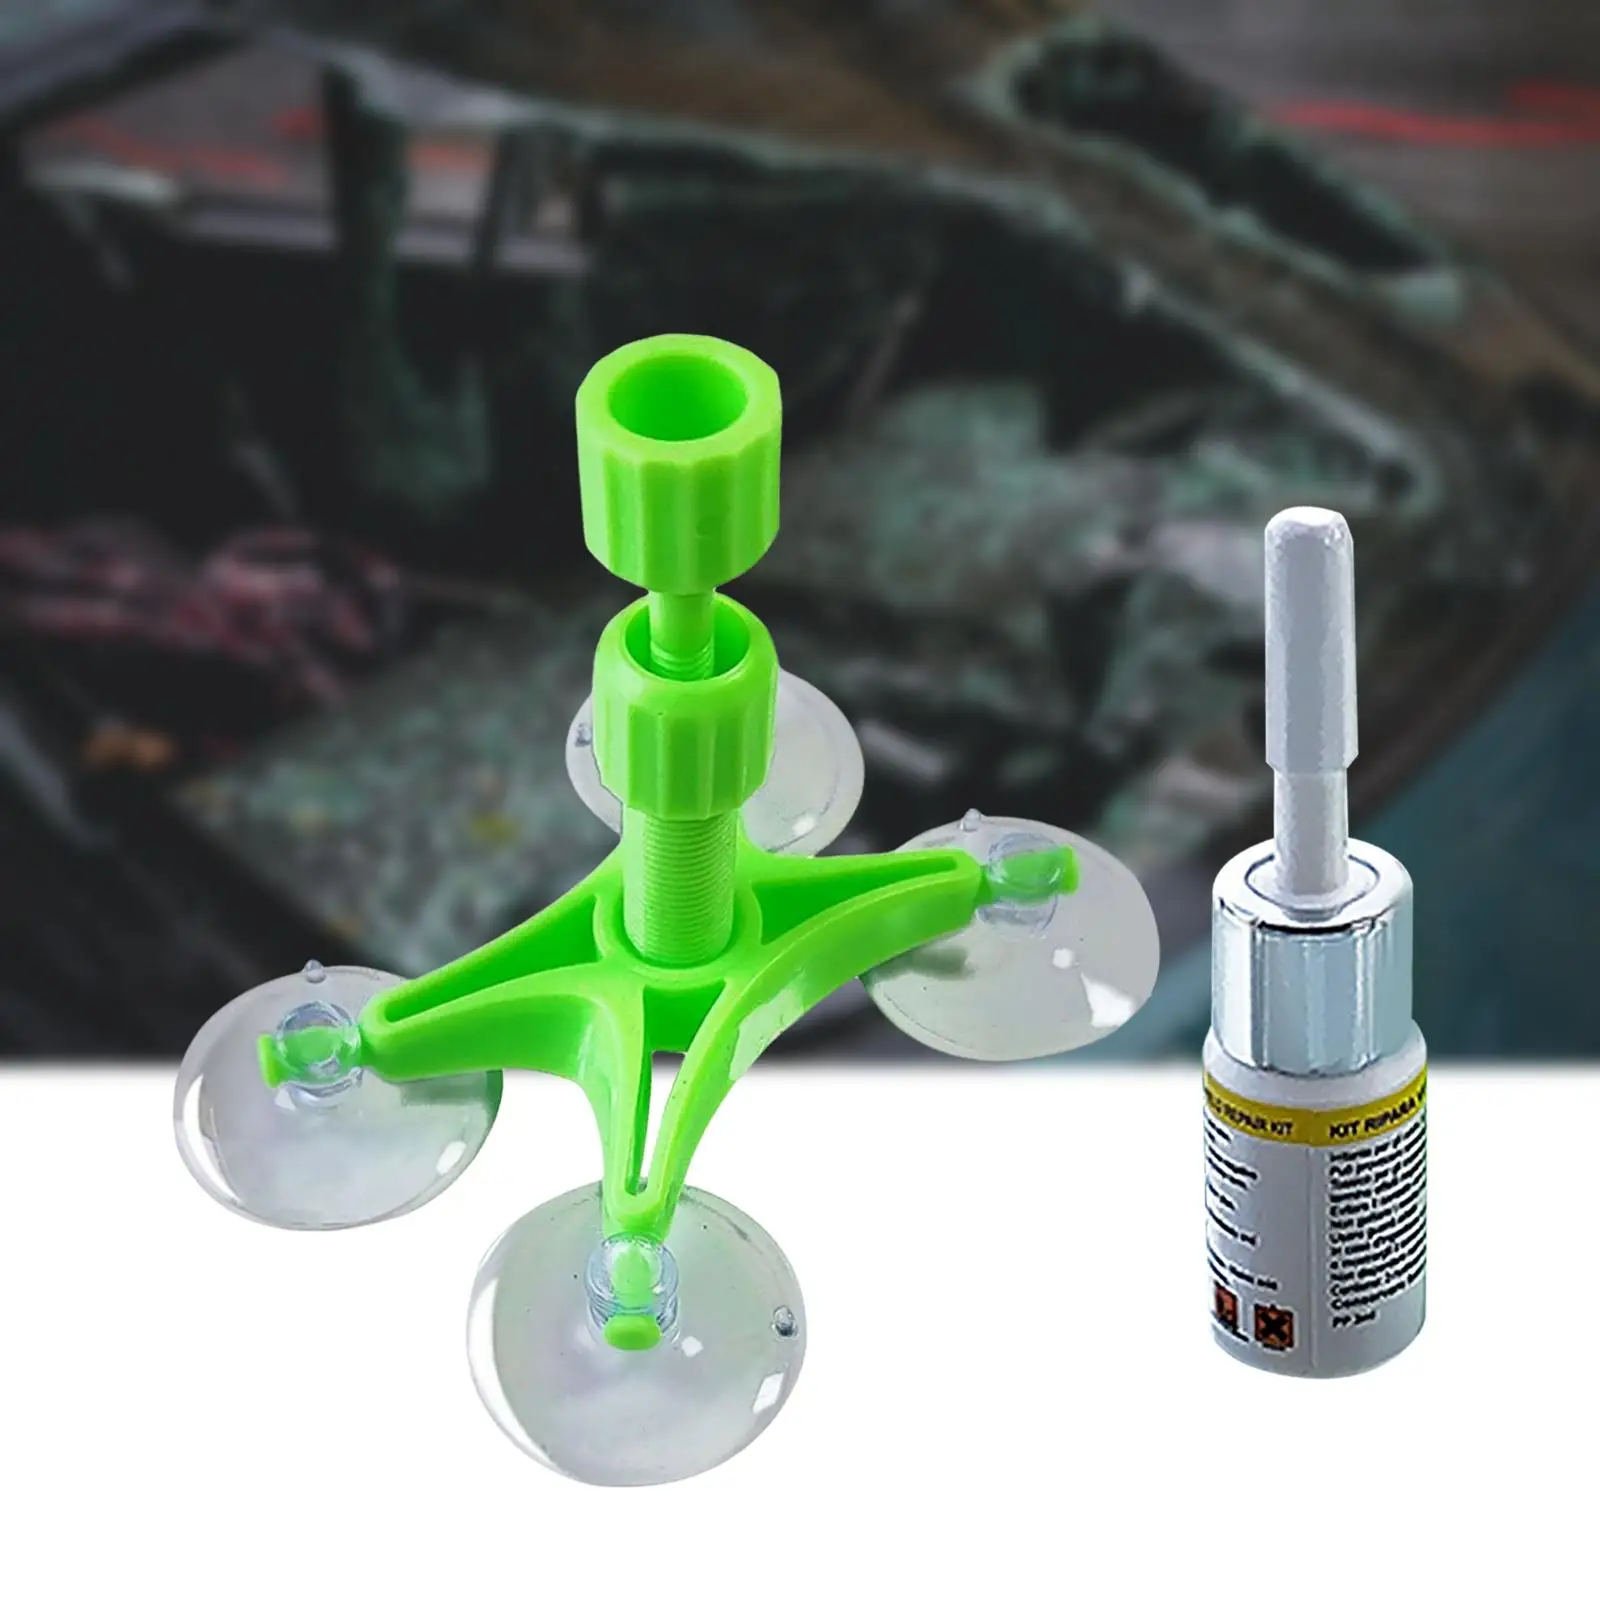 Car Windshield Repair Kit, , to Fix Auto Glass Windshield Crack Chip Scratch DIY Easy to Operate Widely Use